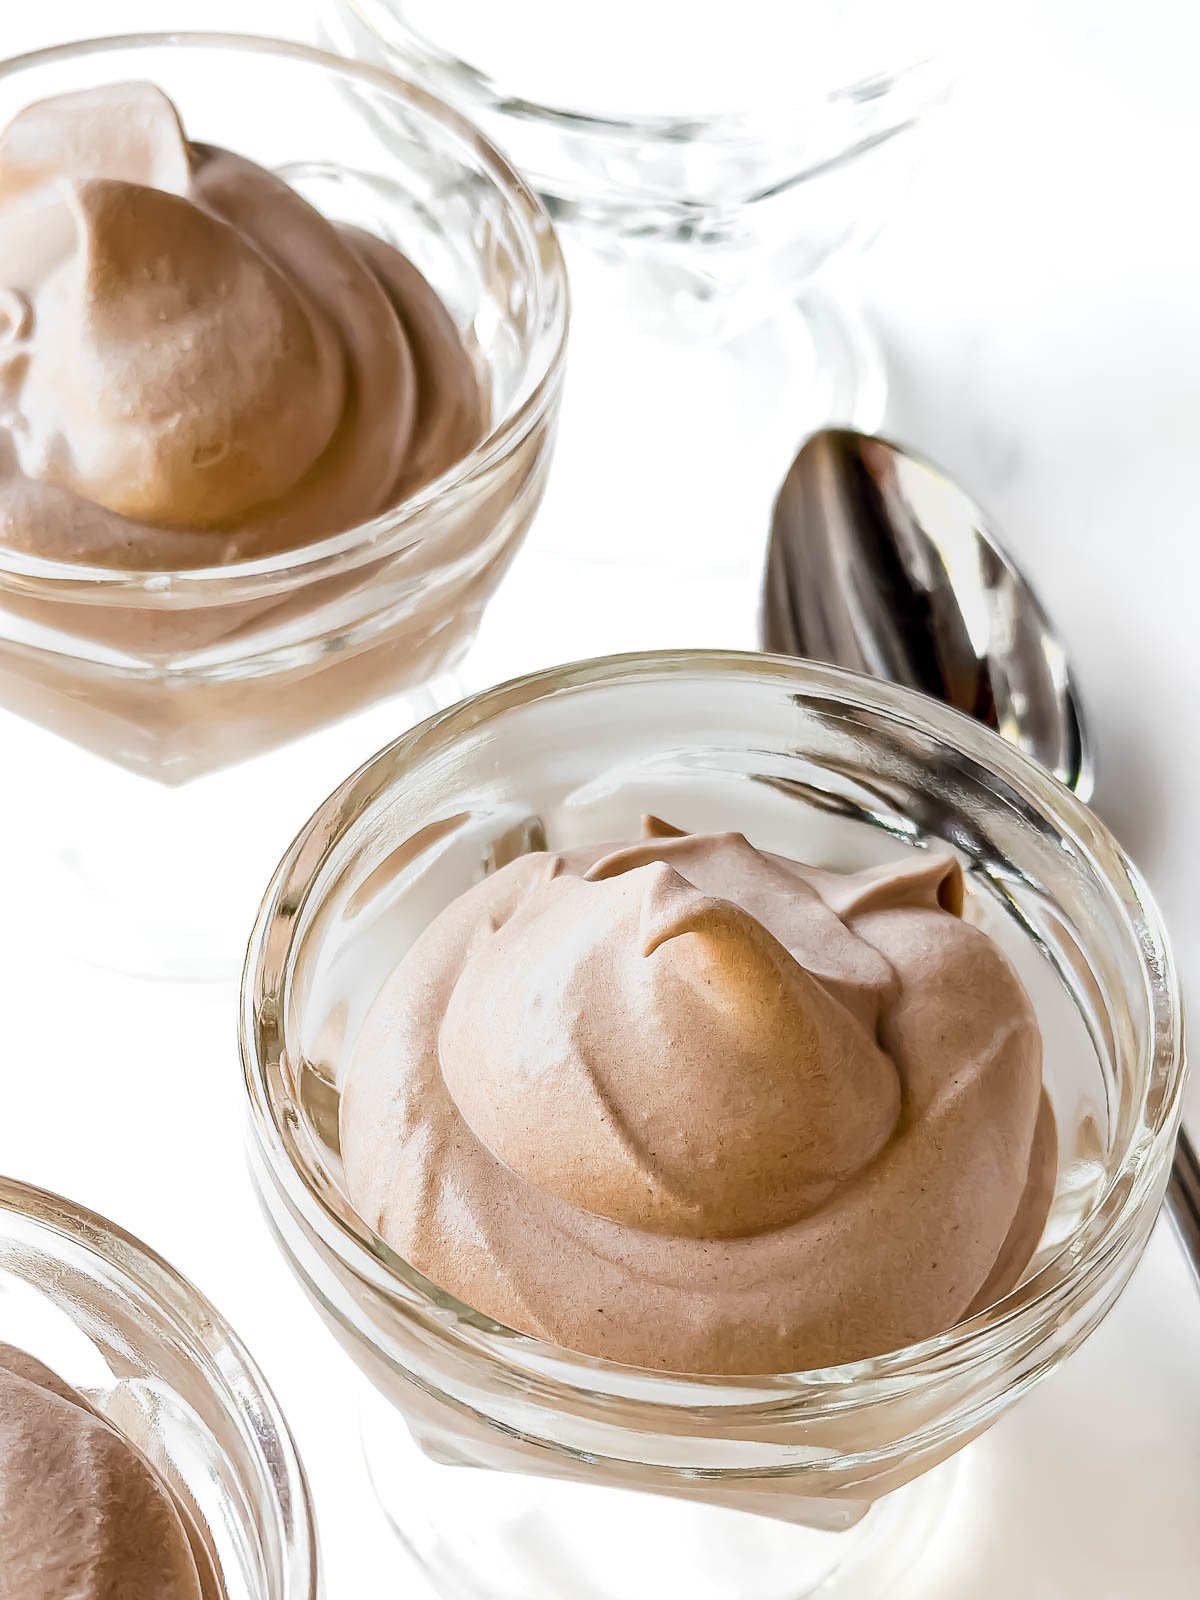 3 minute miracle mousse in a small ice cream bowl.